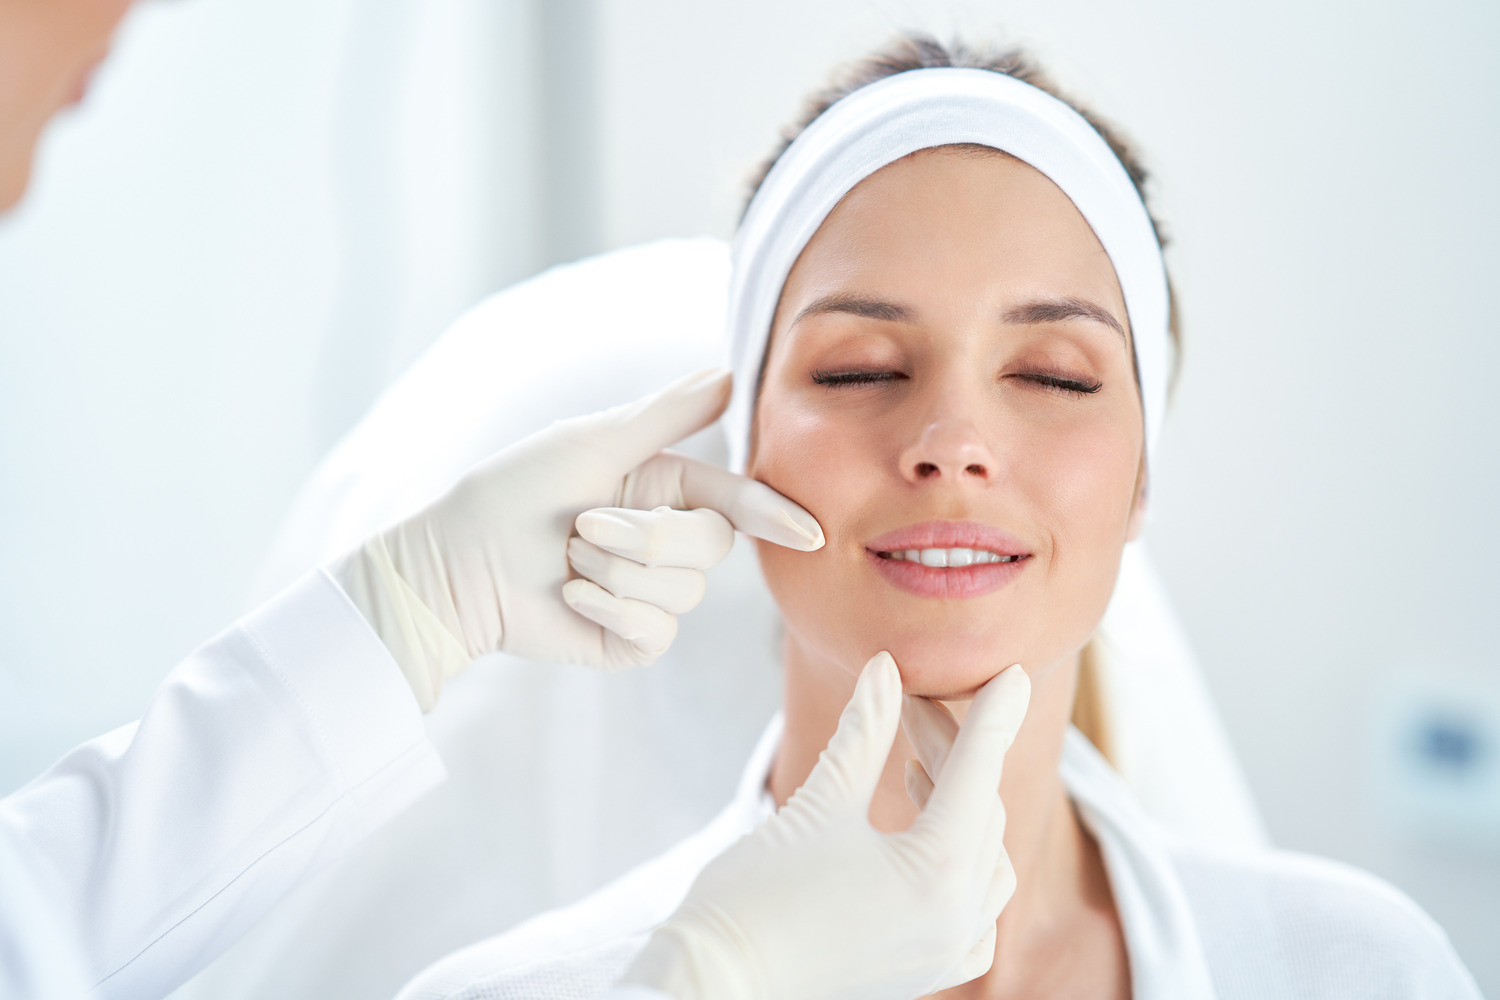 What is Botox and Why Do You Need It?